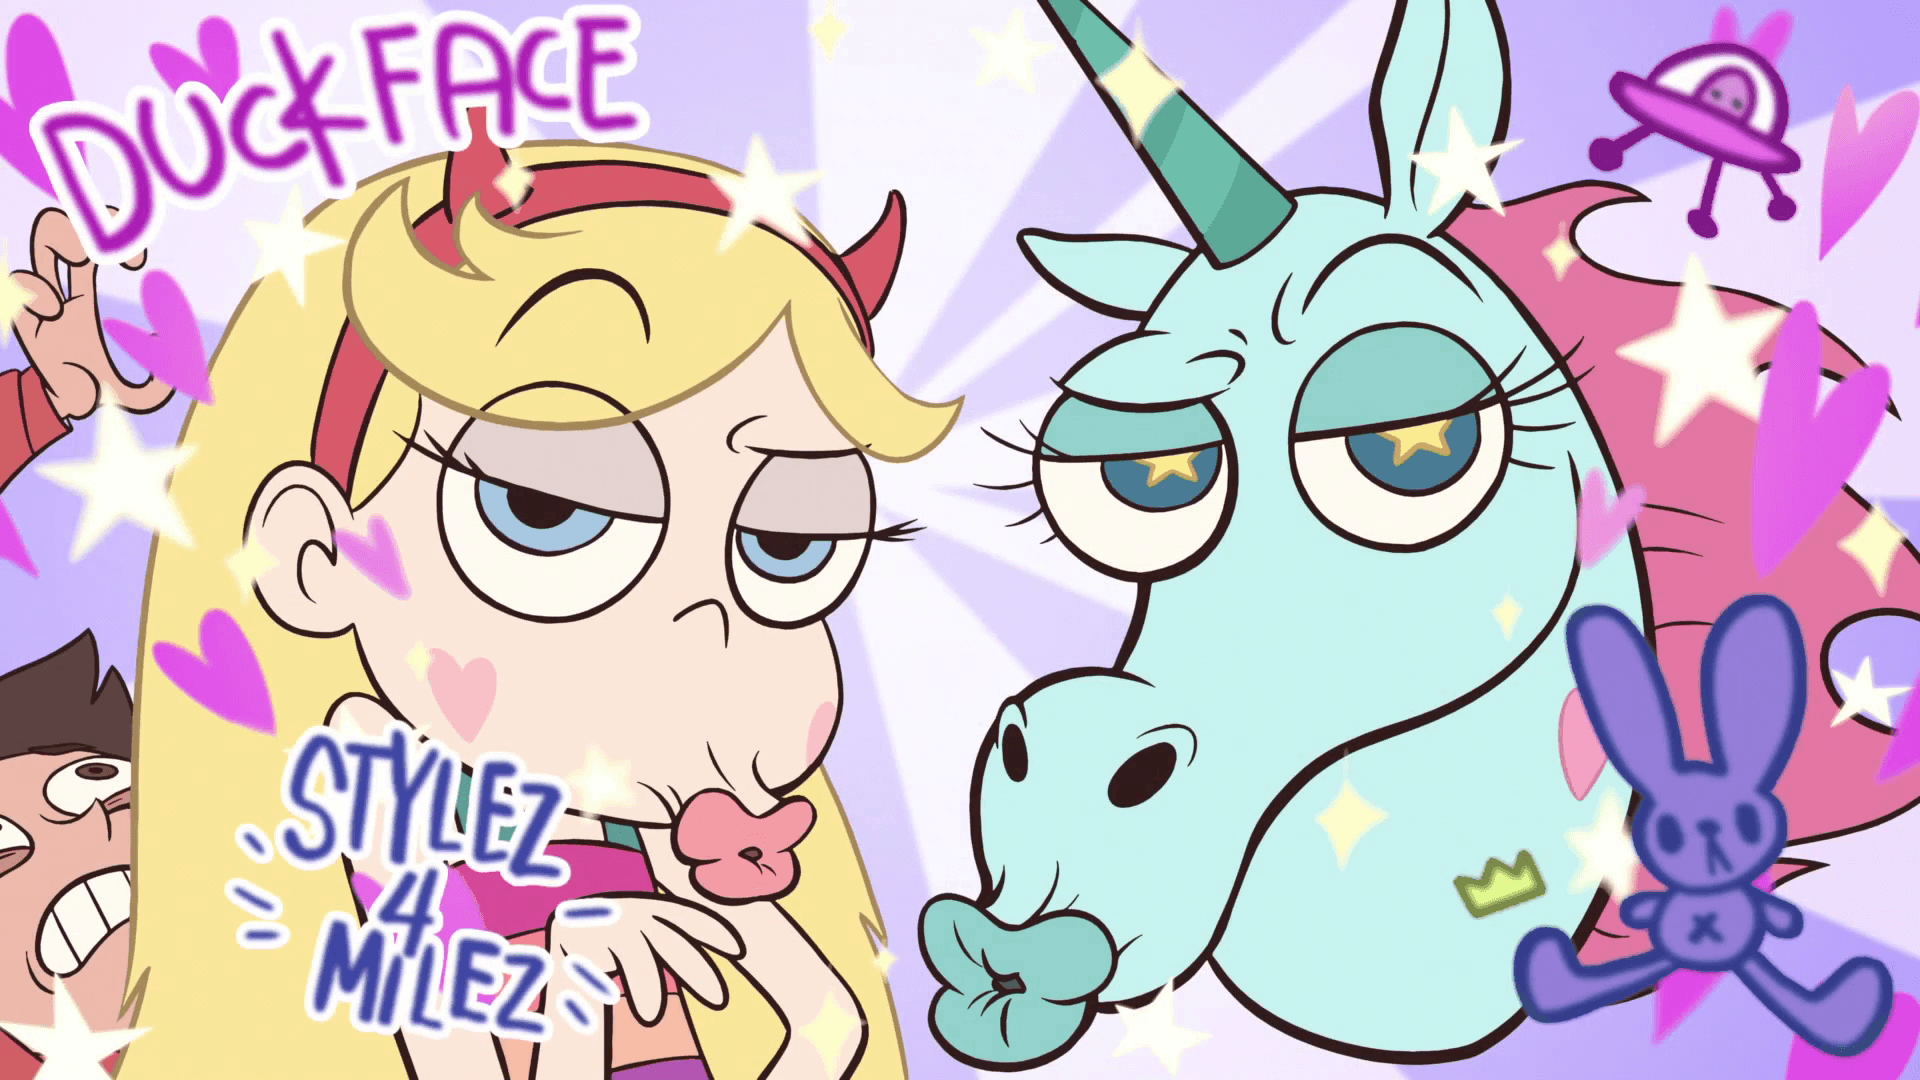 Star Vs. The Forces Of Evil Wallpapers - Wallpaper Cave